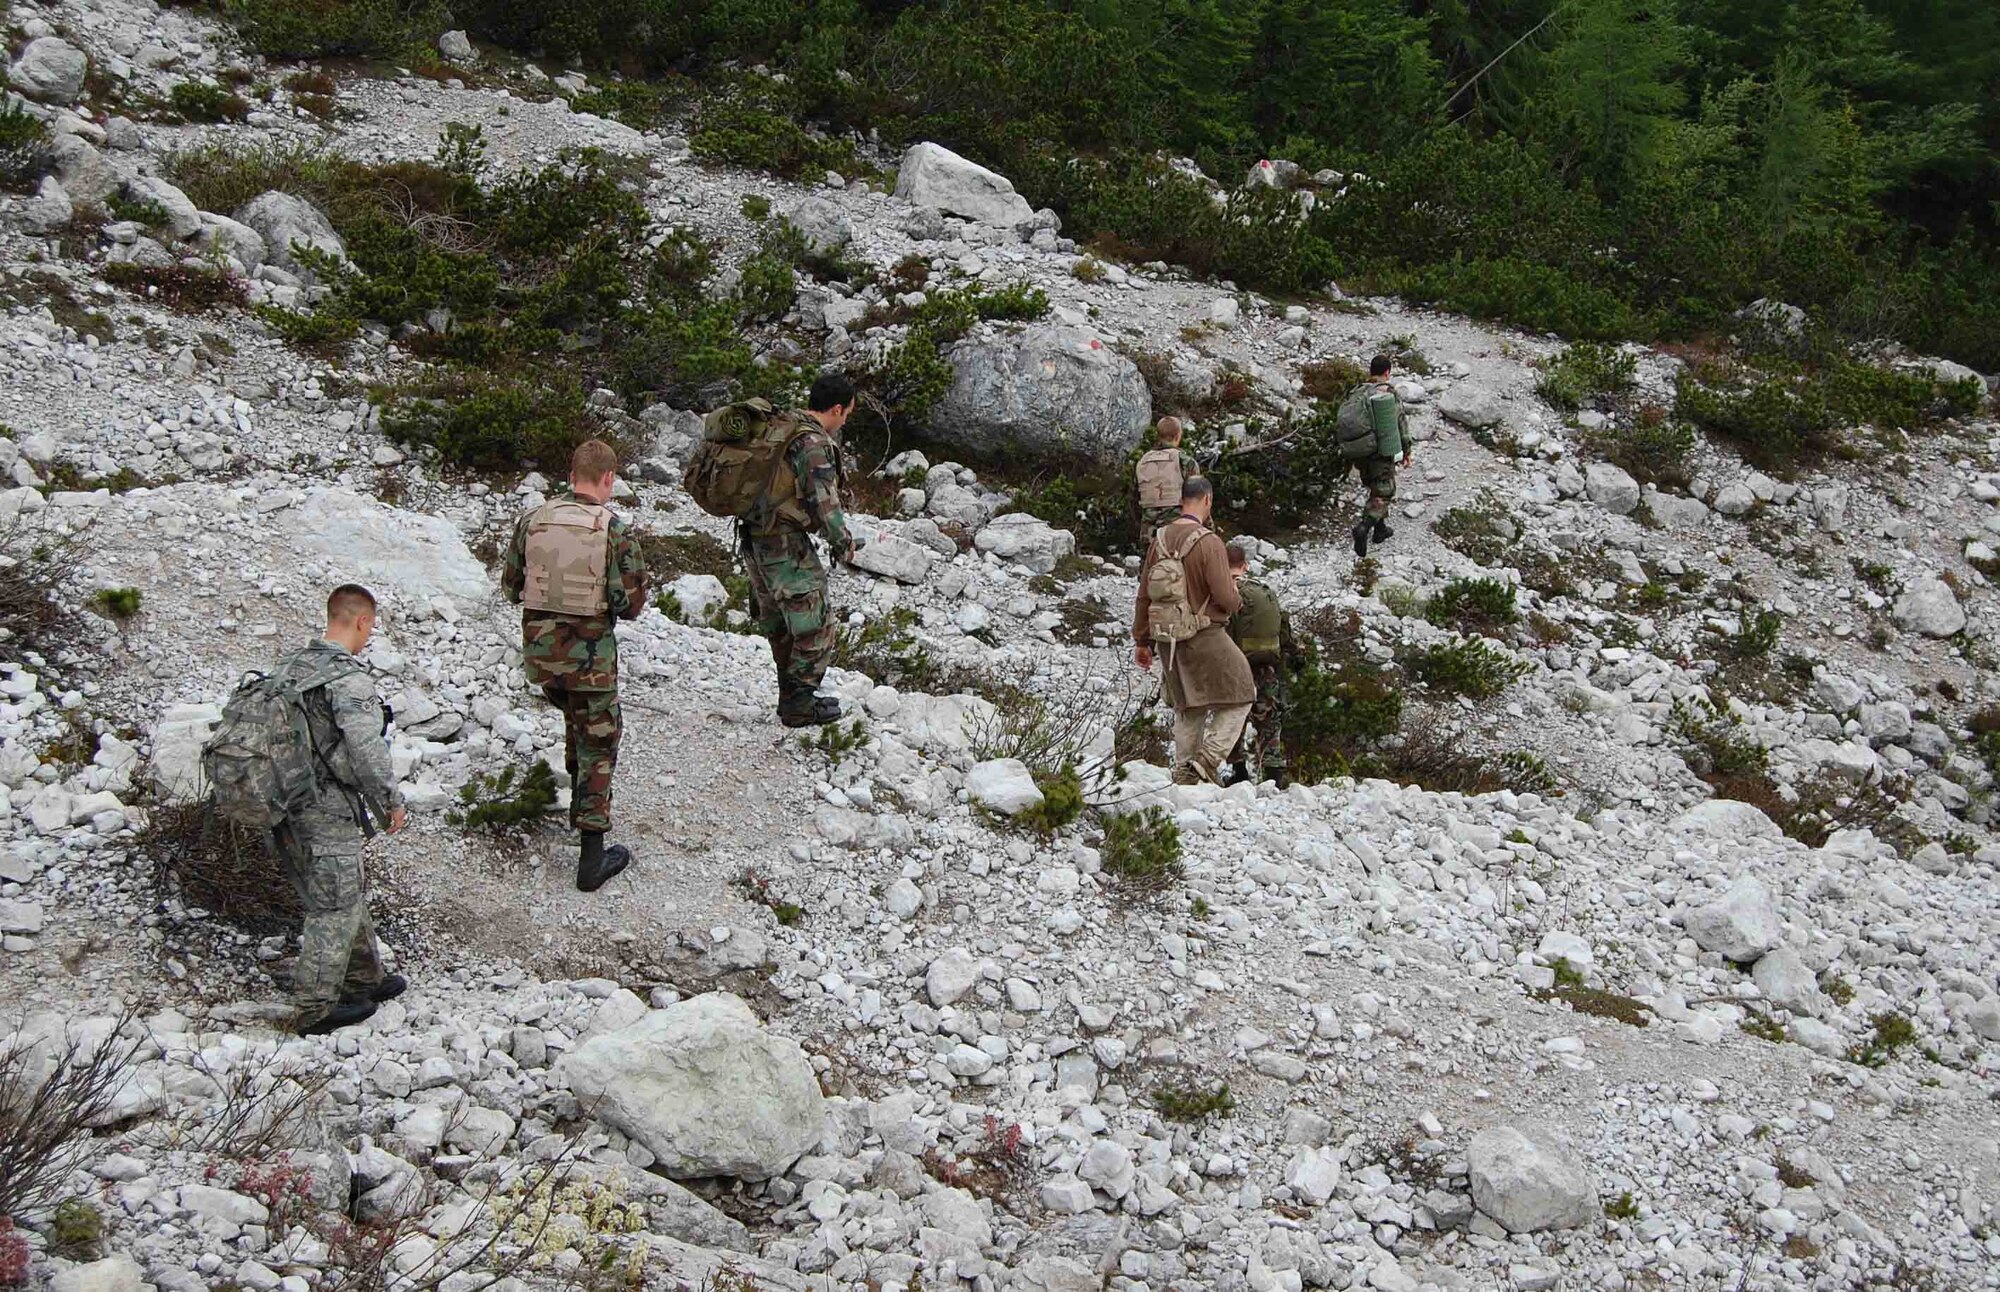 Joint terminal attack controllers with the 8th Air Support Operations Squadron walk through the Italian dolomite mountains with U.S. Air Force Academy cadets as part of an exercise in conjunction with the cadets' Operation Air Force visit of the base June 11. (U.S. Air Force photo/Staff Sgt. Lindsey Maurice)